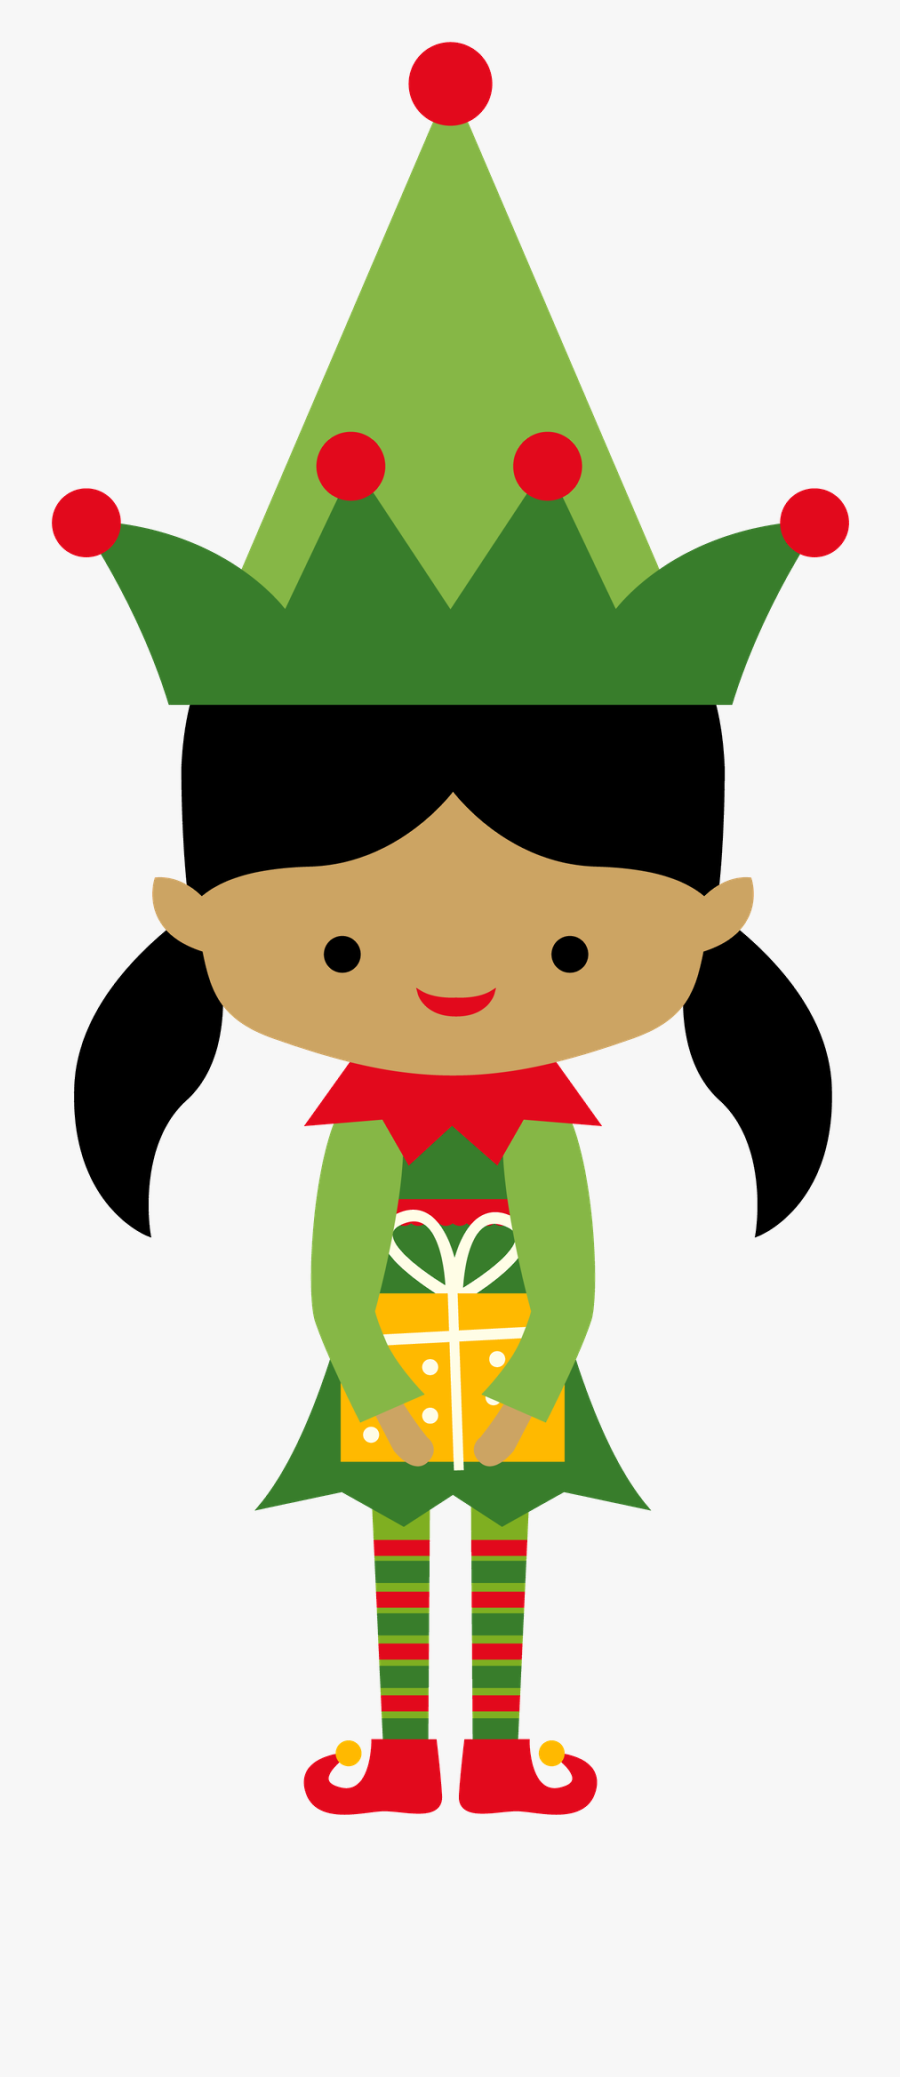 Elf Girl Clipart At Getdrawings - Christmas Girl Elf Clipart, Transparent Clipart